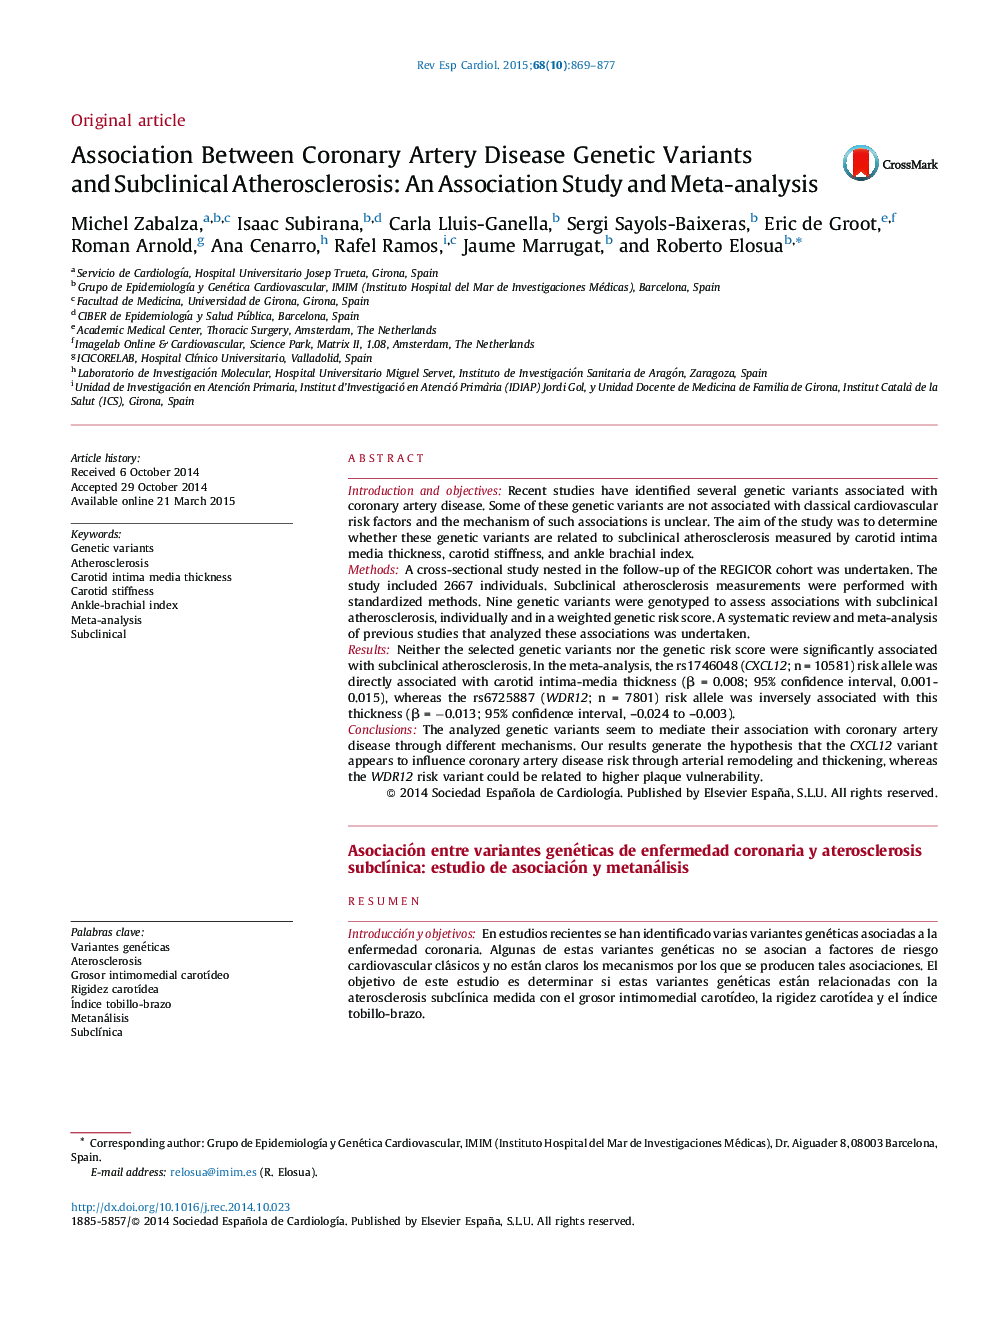 Association Between Coronary Artery Disease Genetic Variants and Subclinical Atherosclerosis: An Association Study and Meta-analysis